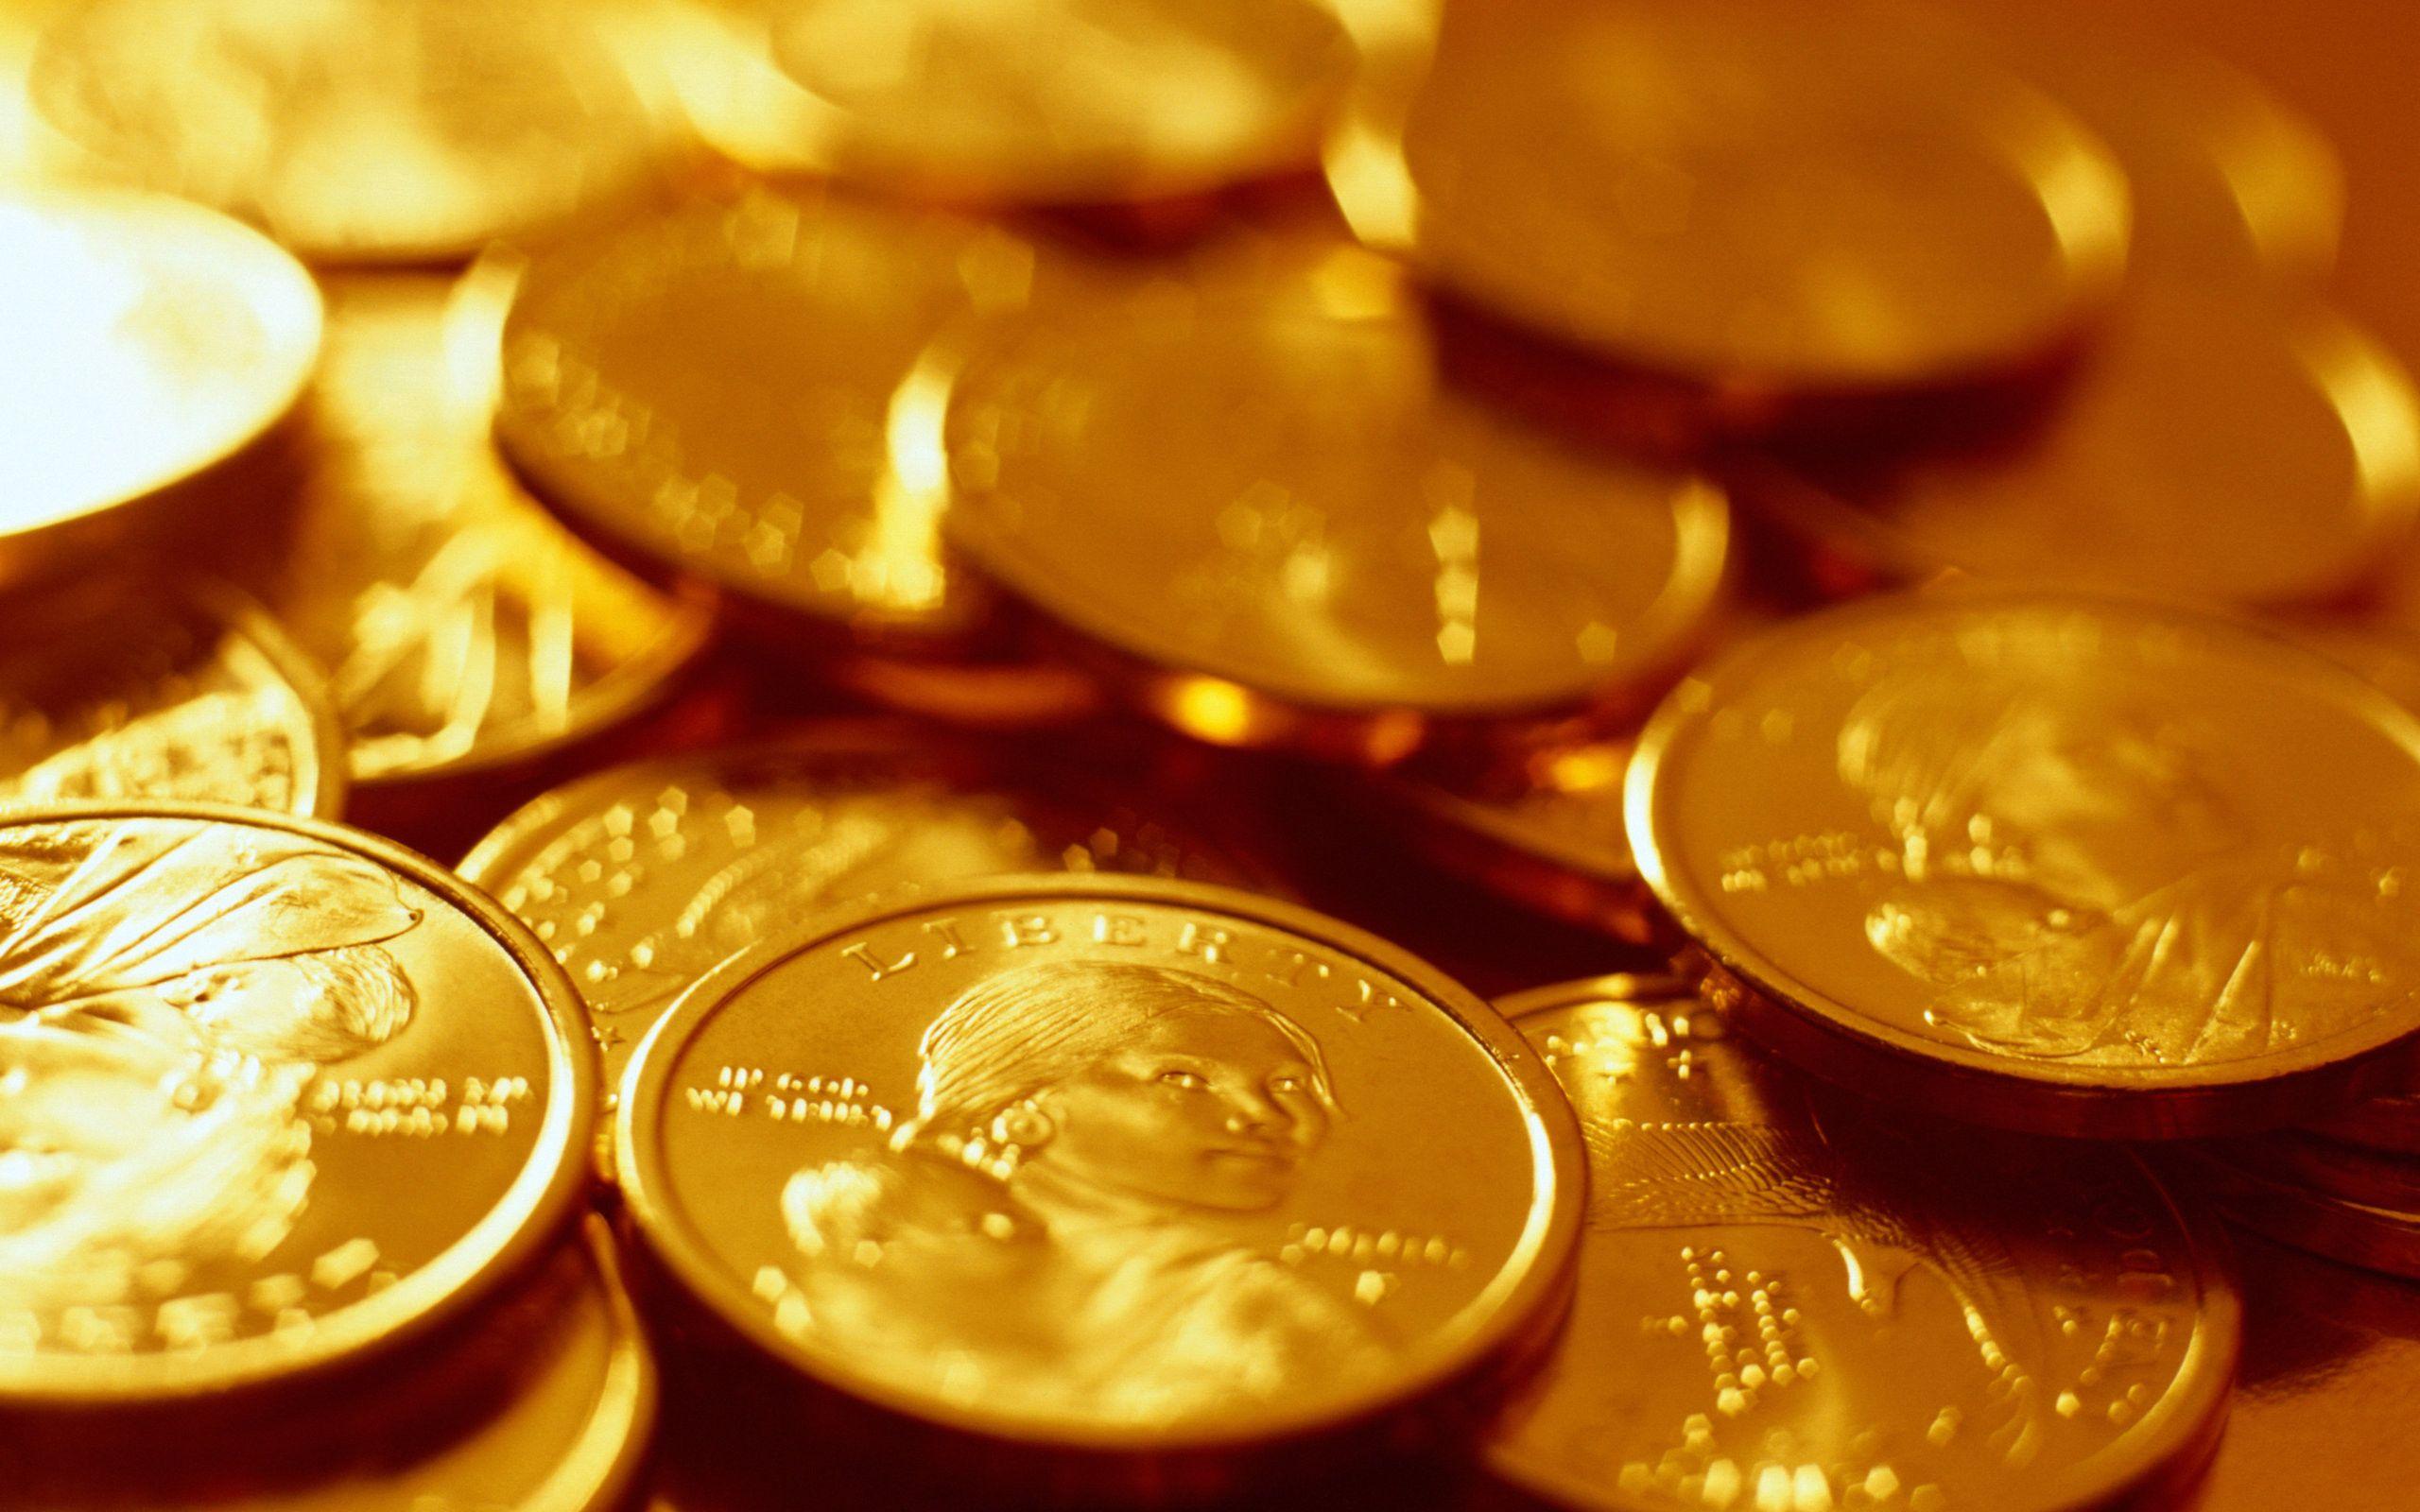 HD wallpaper gold coin lot bitcoin coins money currency wealth rich   Wallpaper Flare